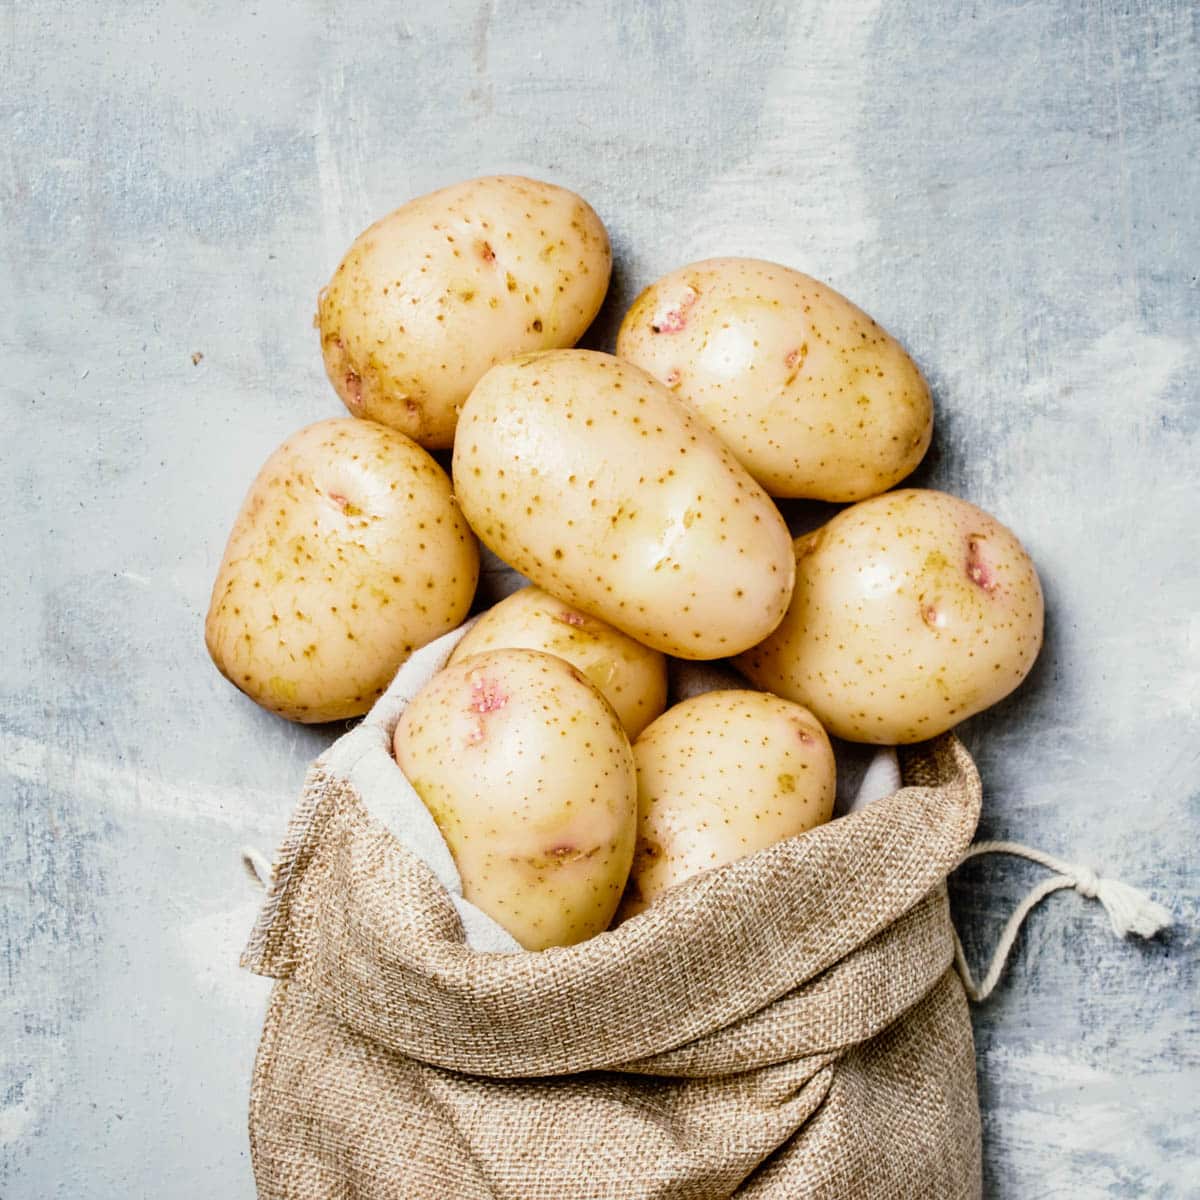 Burlap bag with potatoes spilling out onto a grey background.